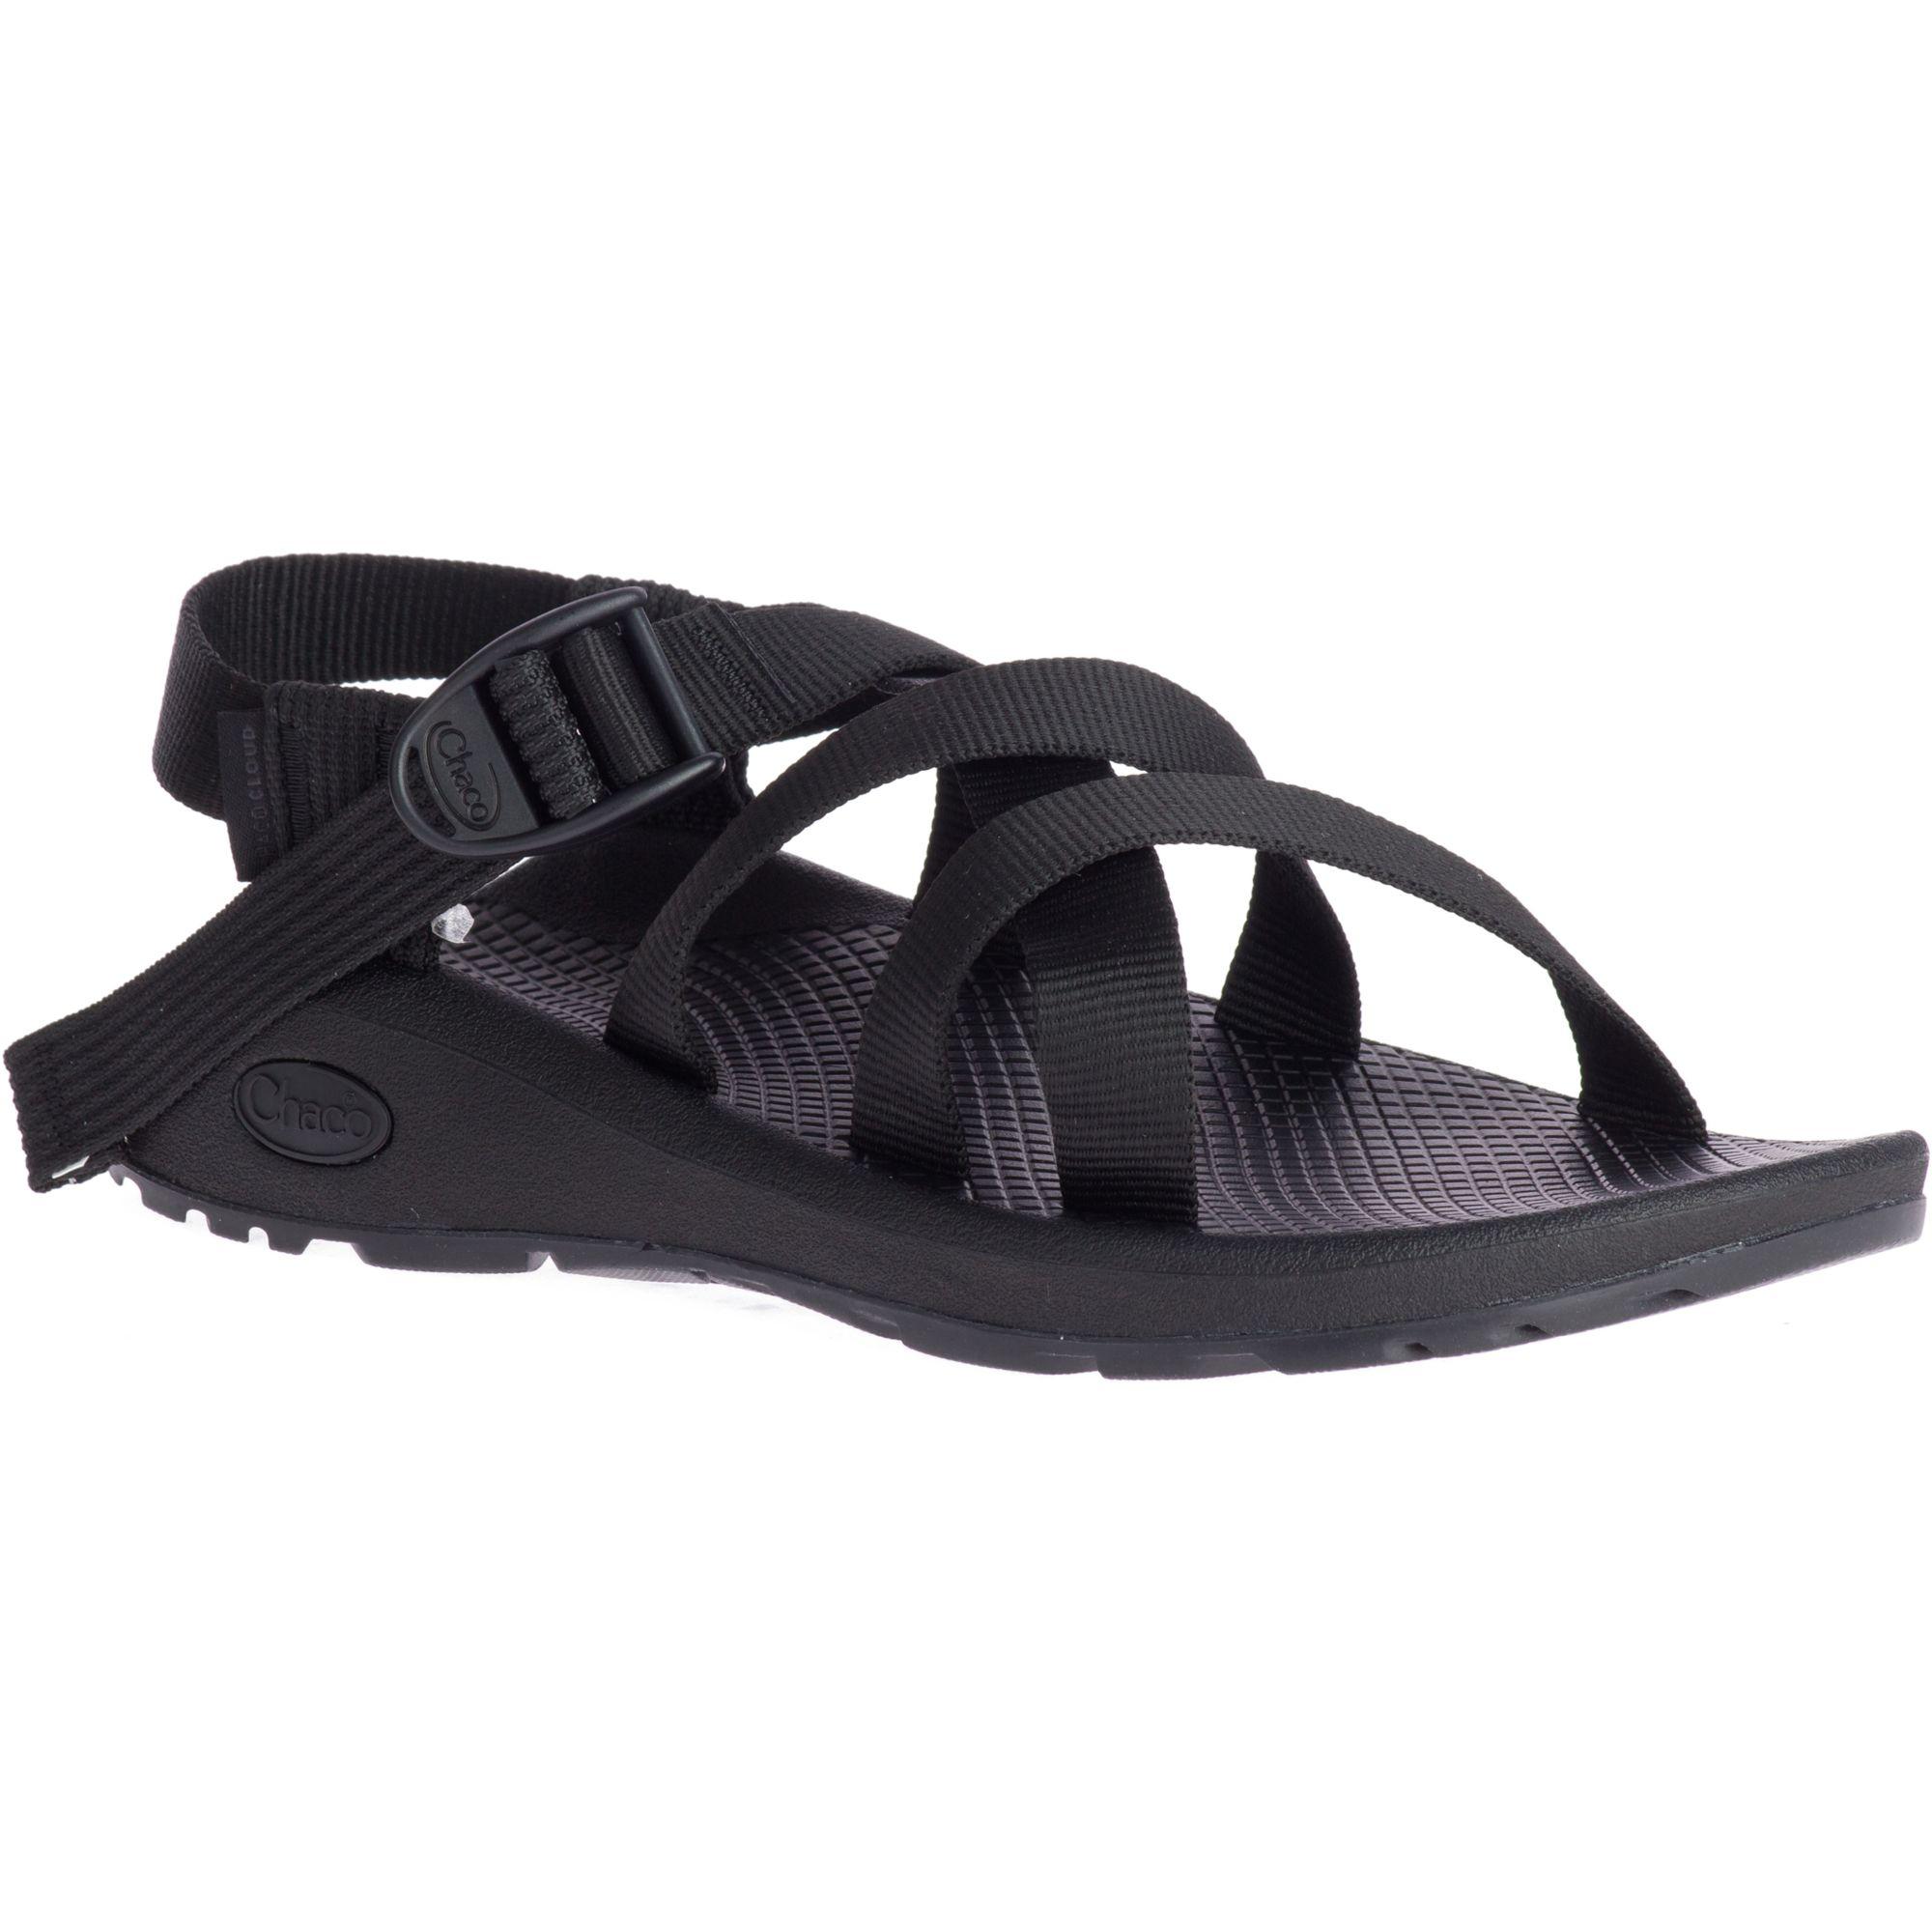 Chaco Rubber Banded Z/cloud Sandal in Black - Save 25% - Lyst